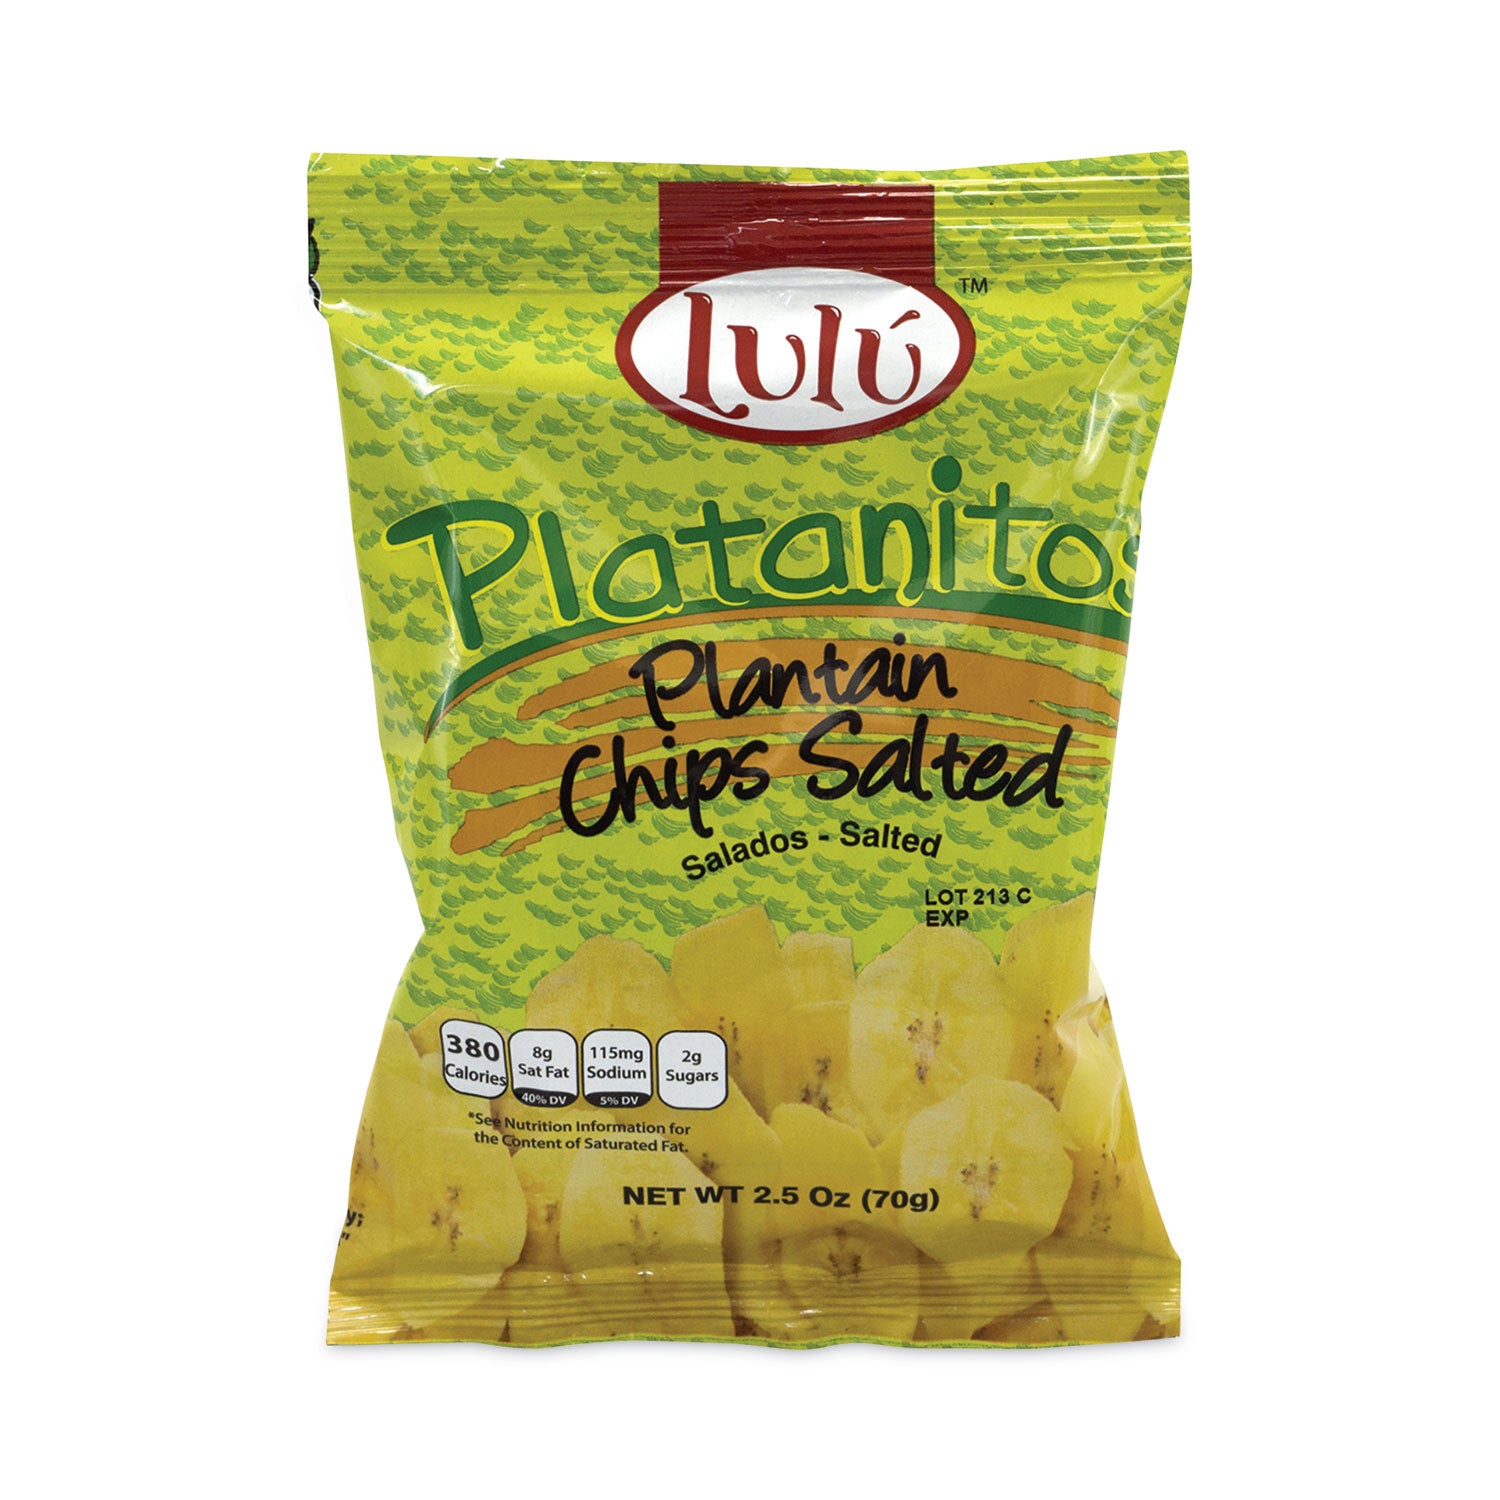 platanitos-plantain-chips-25-oz-pack-30-packs-carton-ships-in-1-3-business-days_grr20902612 - 1